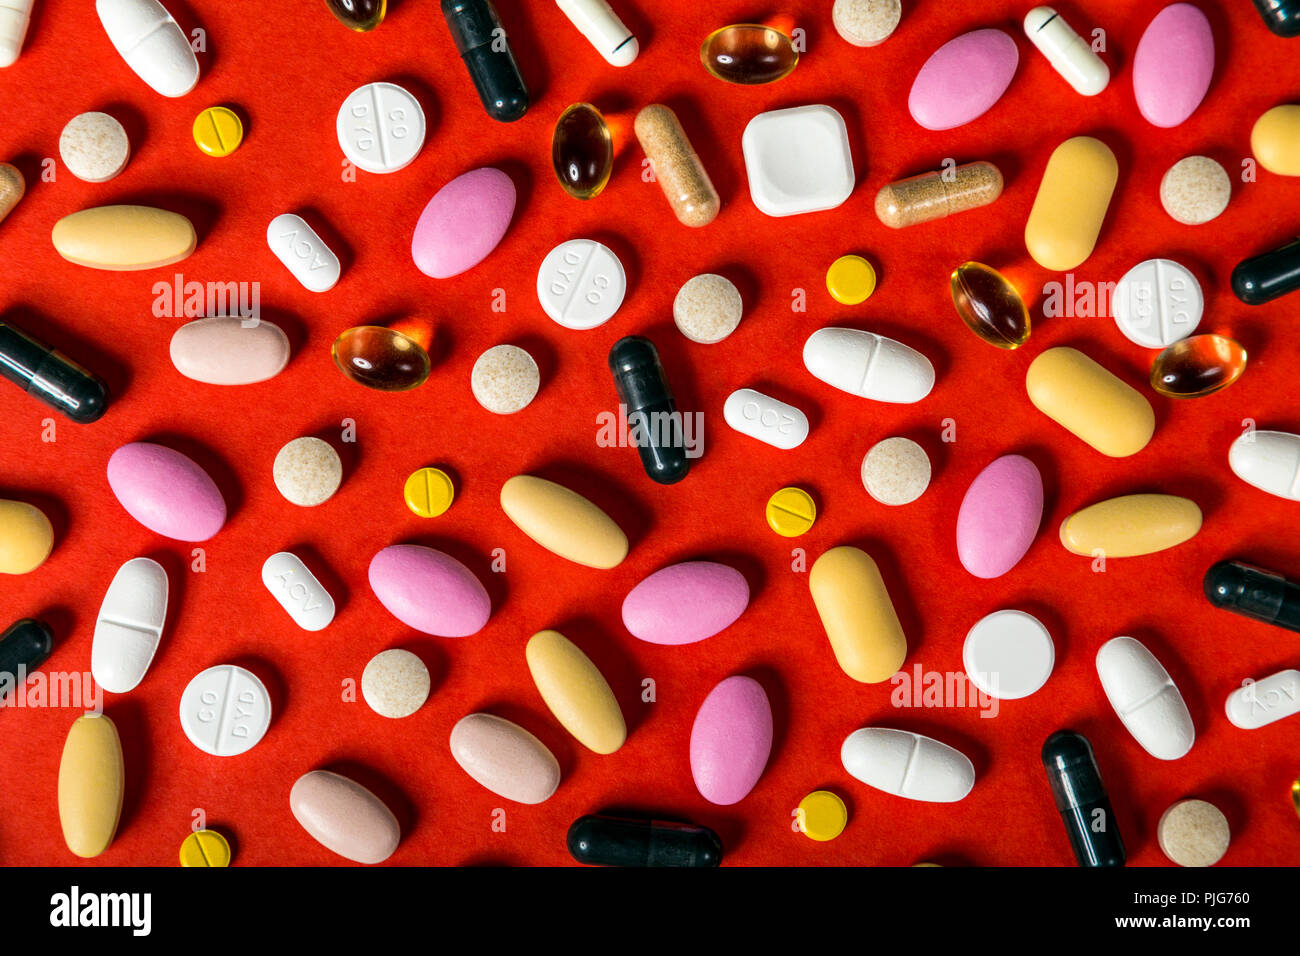 Scattered pills, capsules and tablets against red background, supplements, medication, healthcare Stock Photo